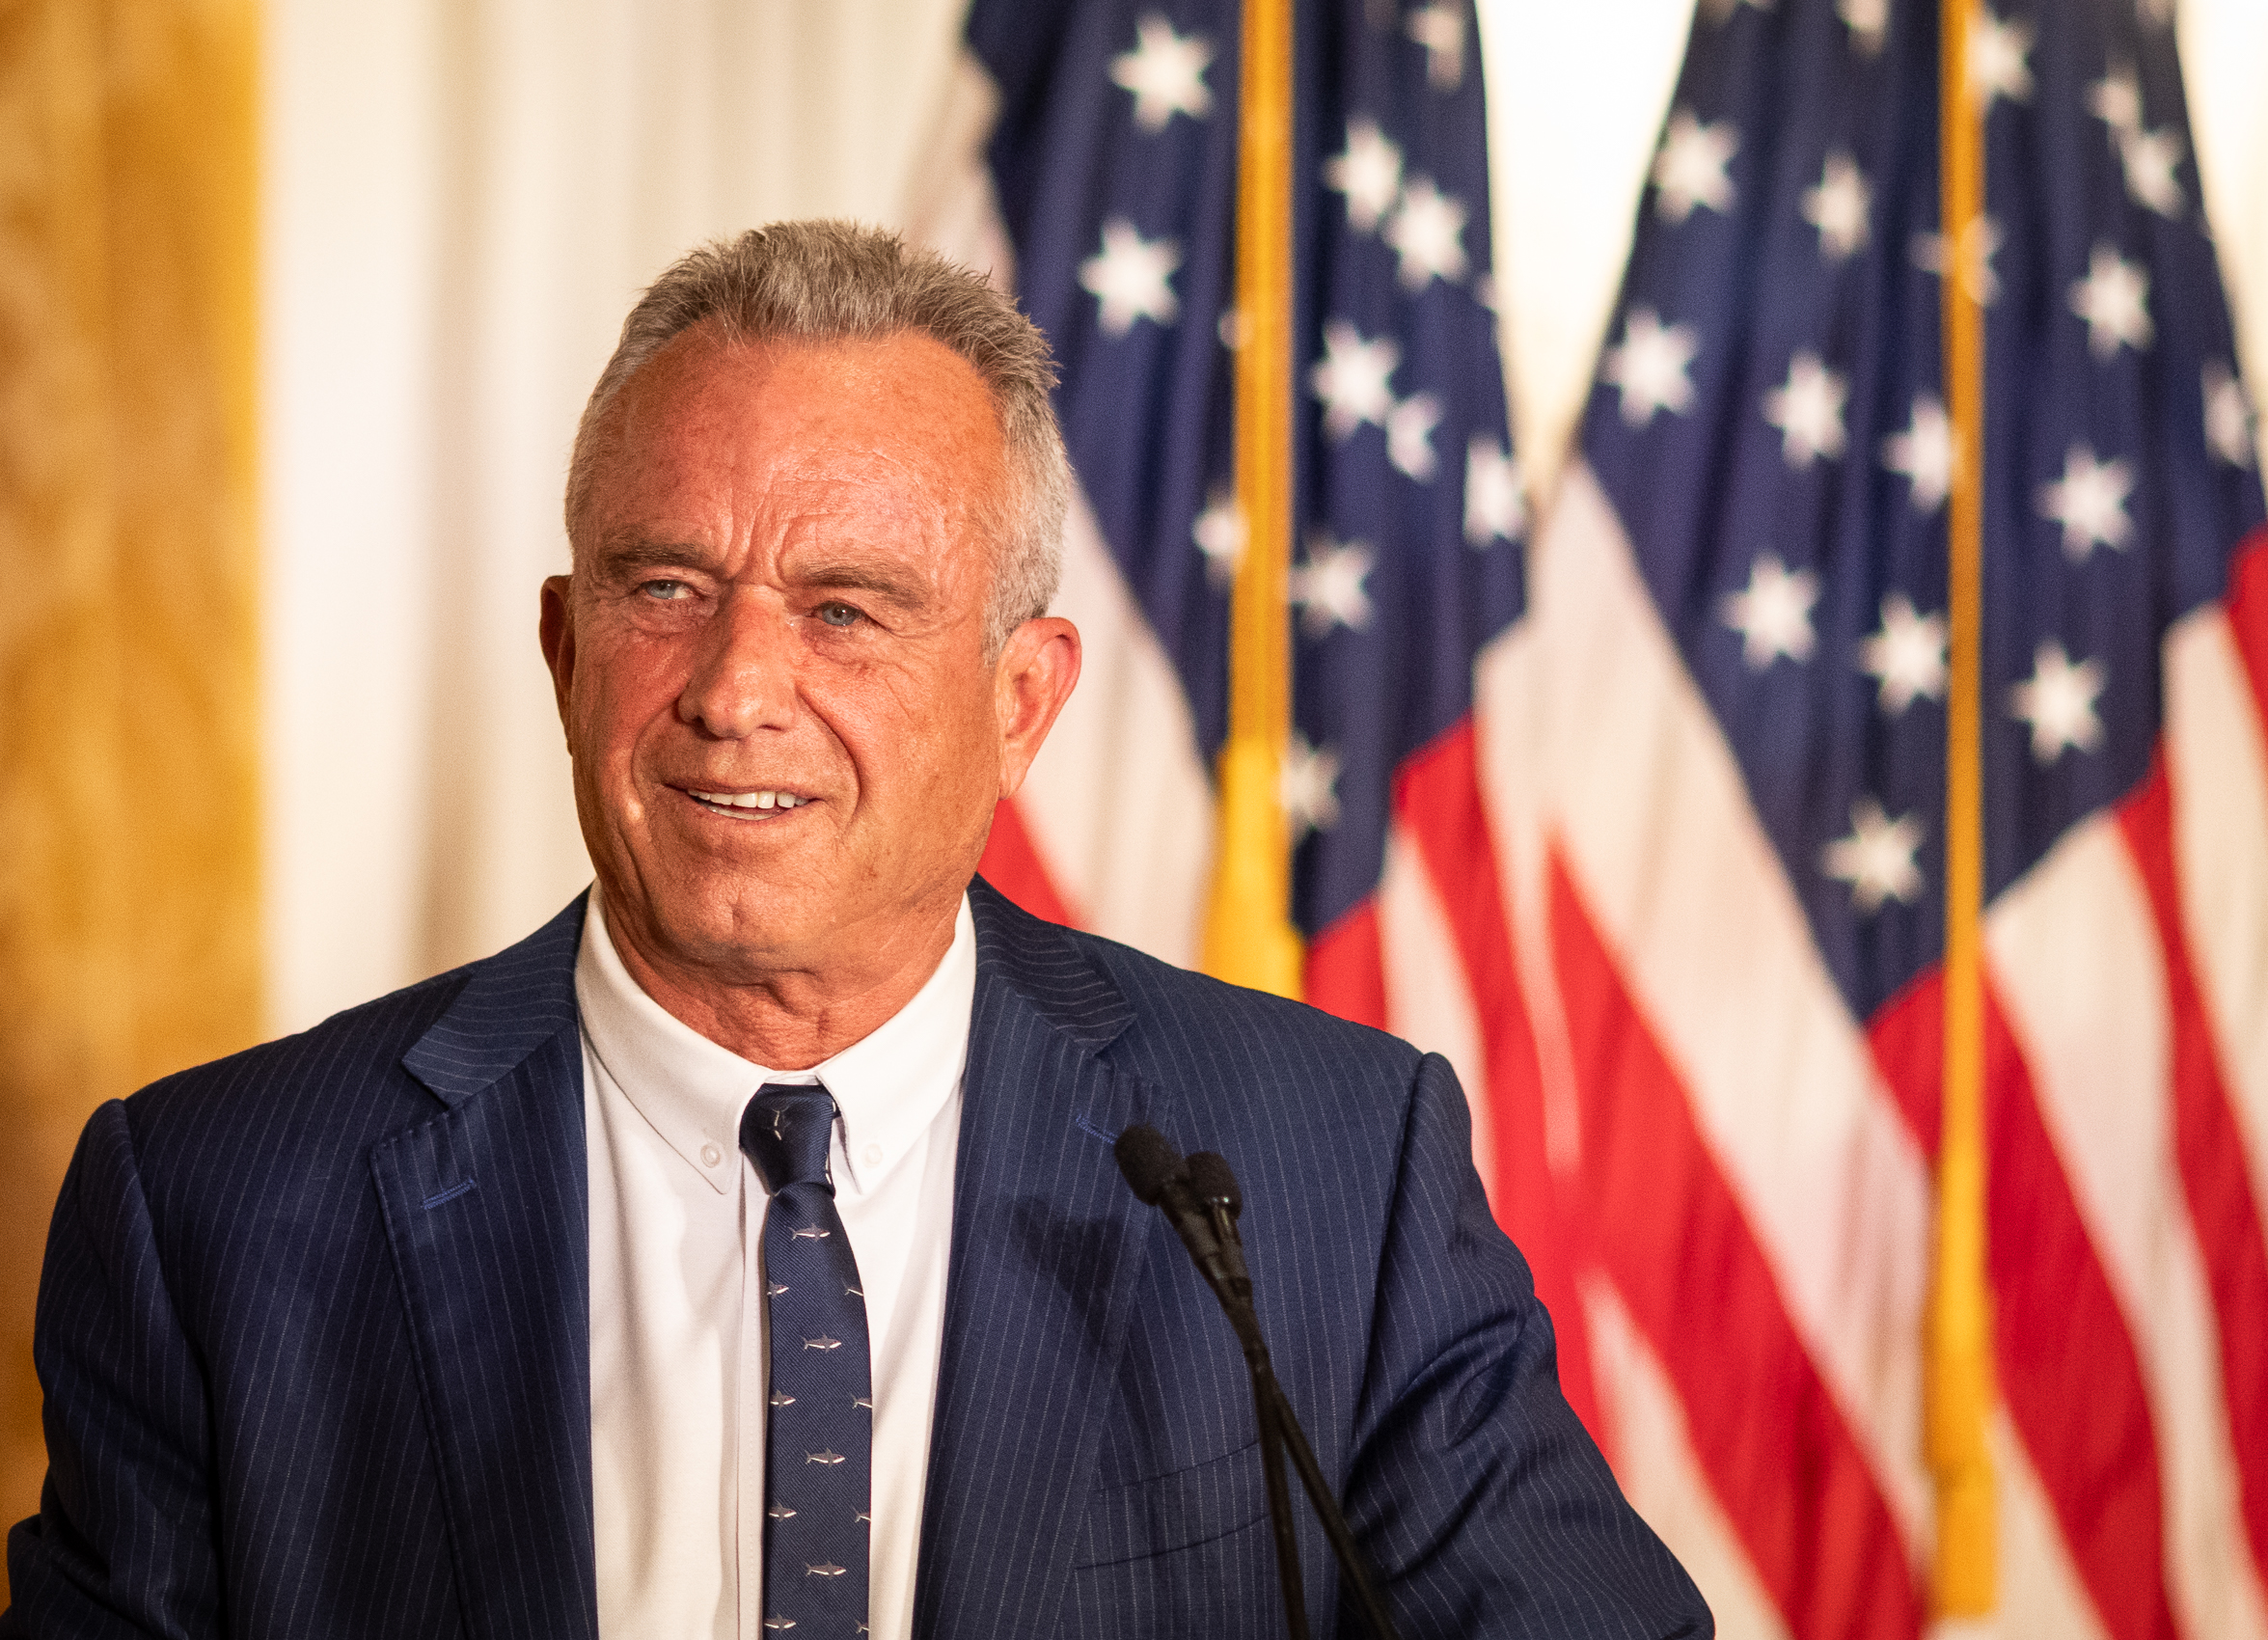 RFK Jr. to Hold Live Stream on X and Answer CNN Debate Questions